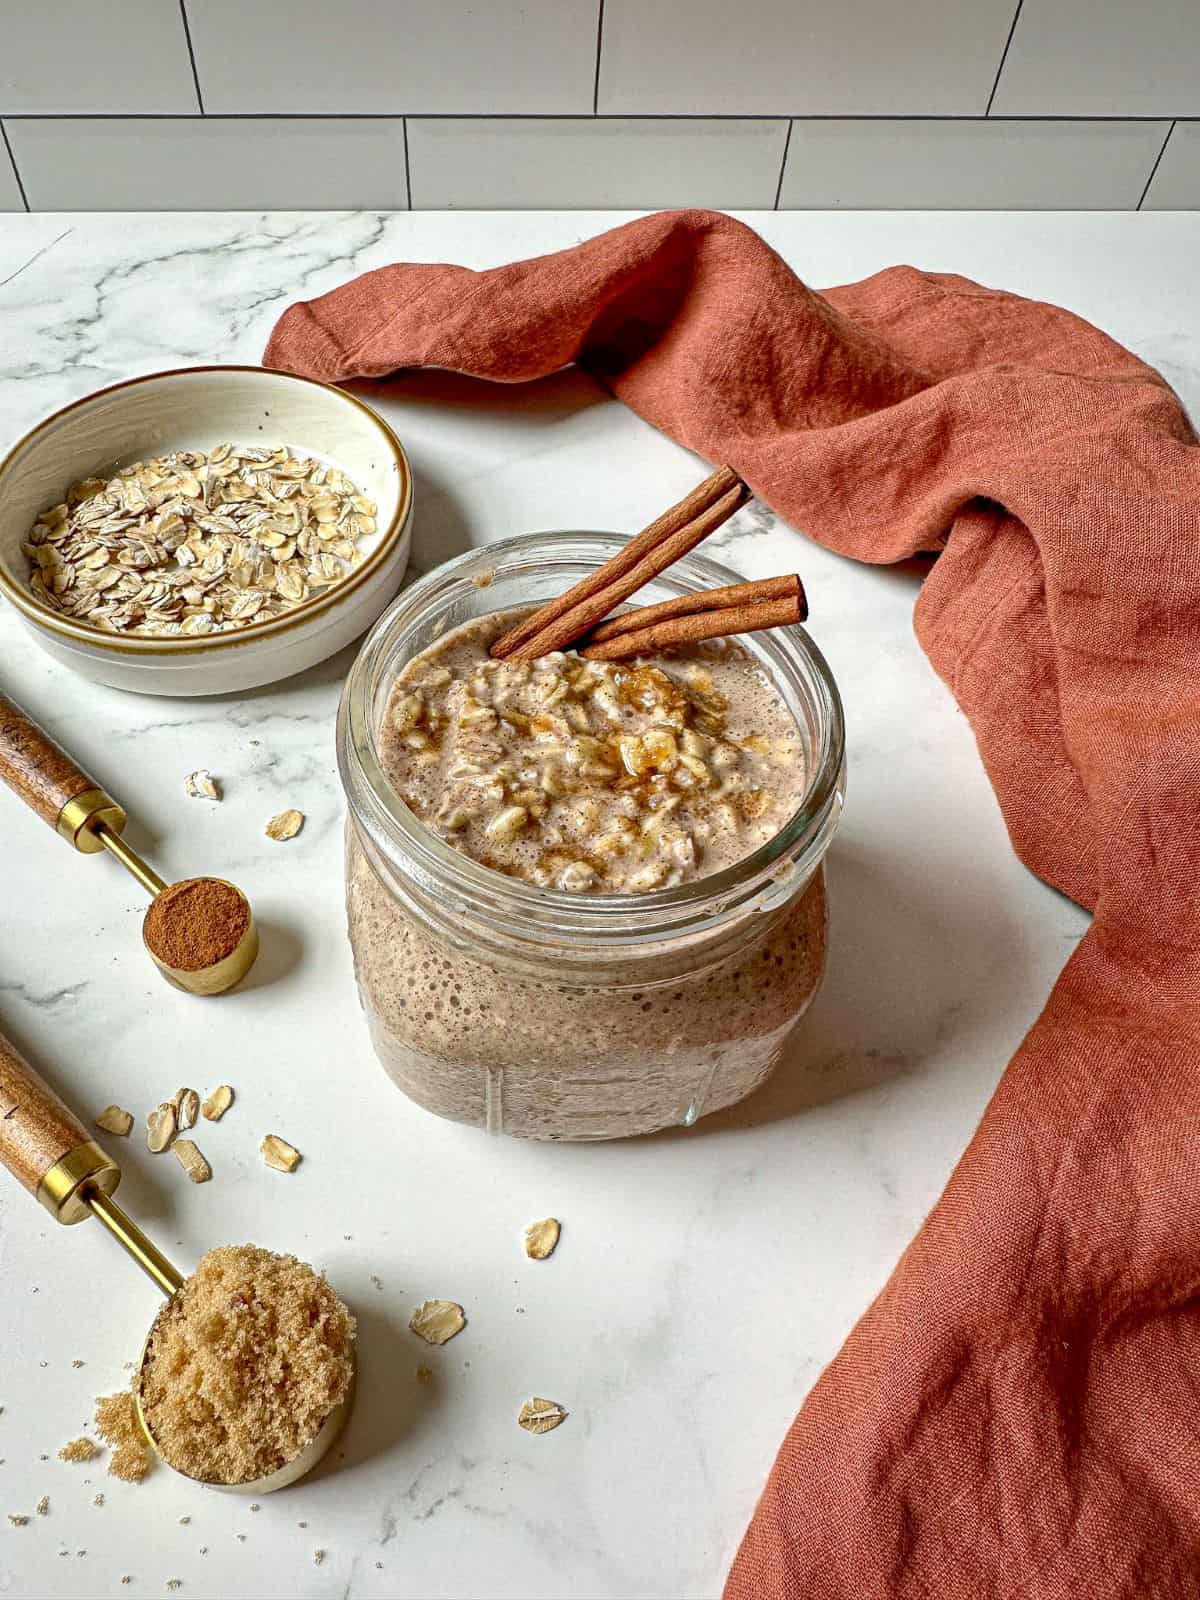 A mason jar filled with cinnamon overnight oats are on a marble countertop. Ingredients like a bowl of oats, cinnamon, and brown sugar sit on the counter next to the jar.